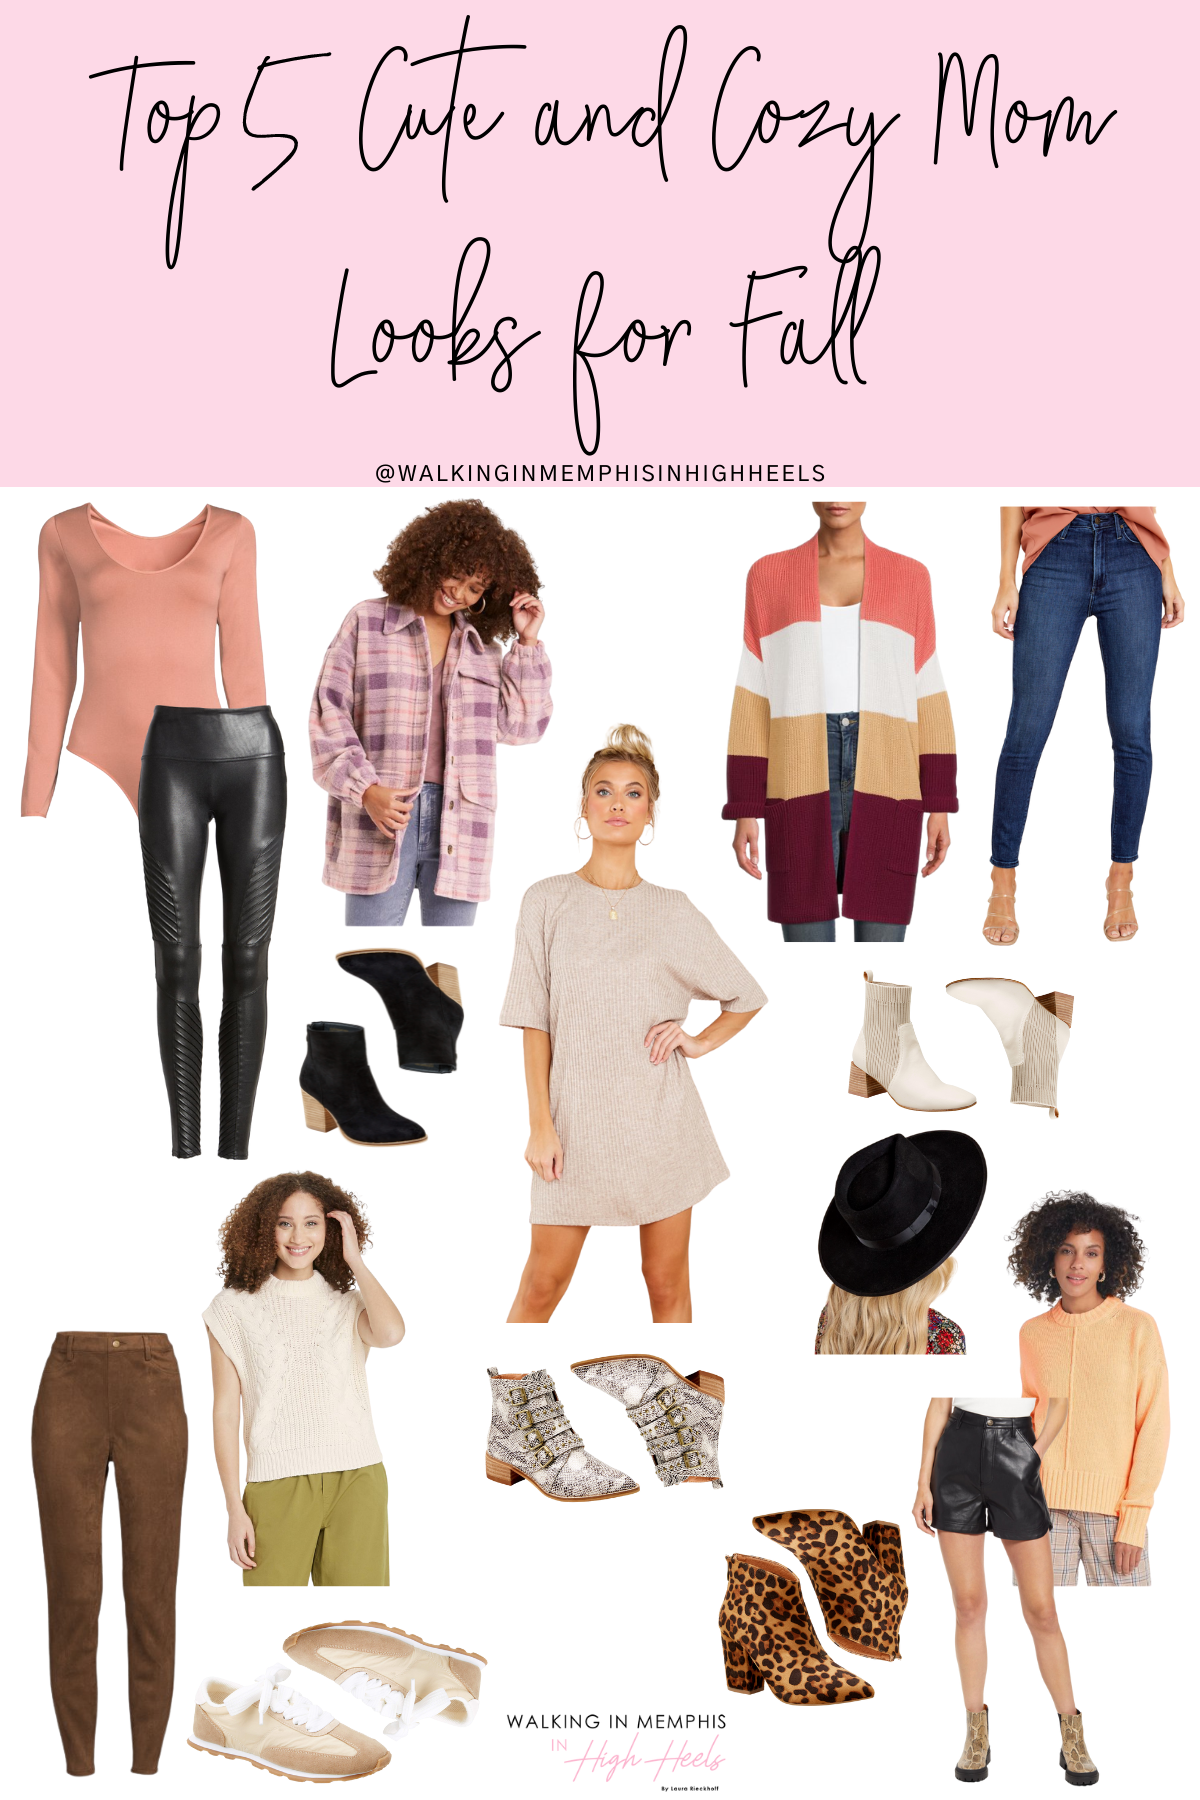 Cozy Mom Looks for Fall featured by top US mom fashion blogger, Walking in Memphis in High Heels.